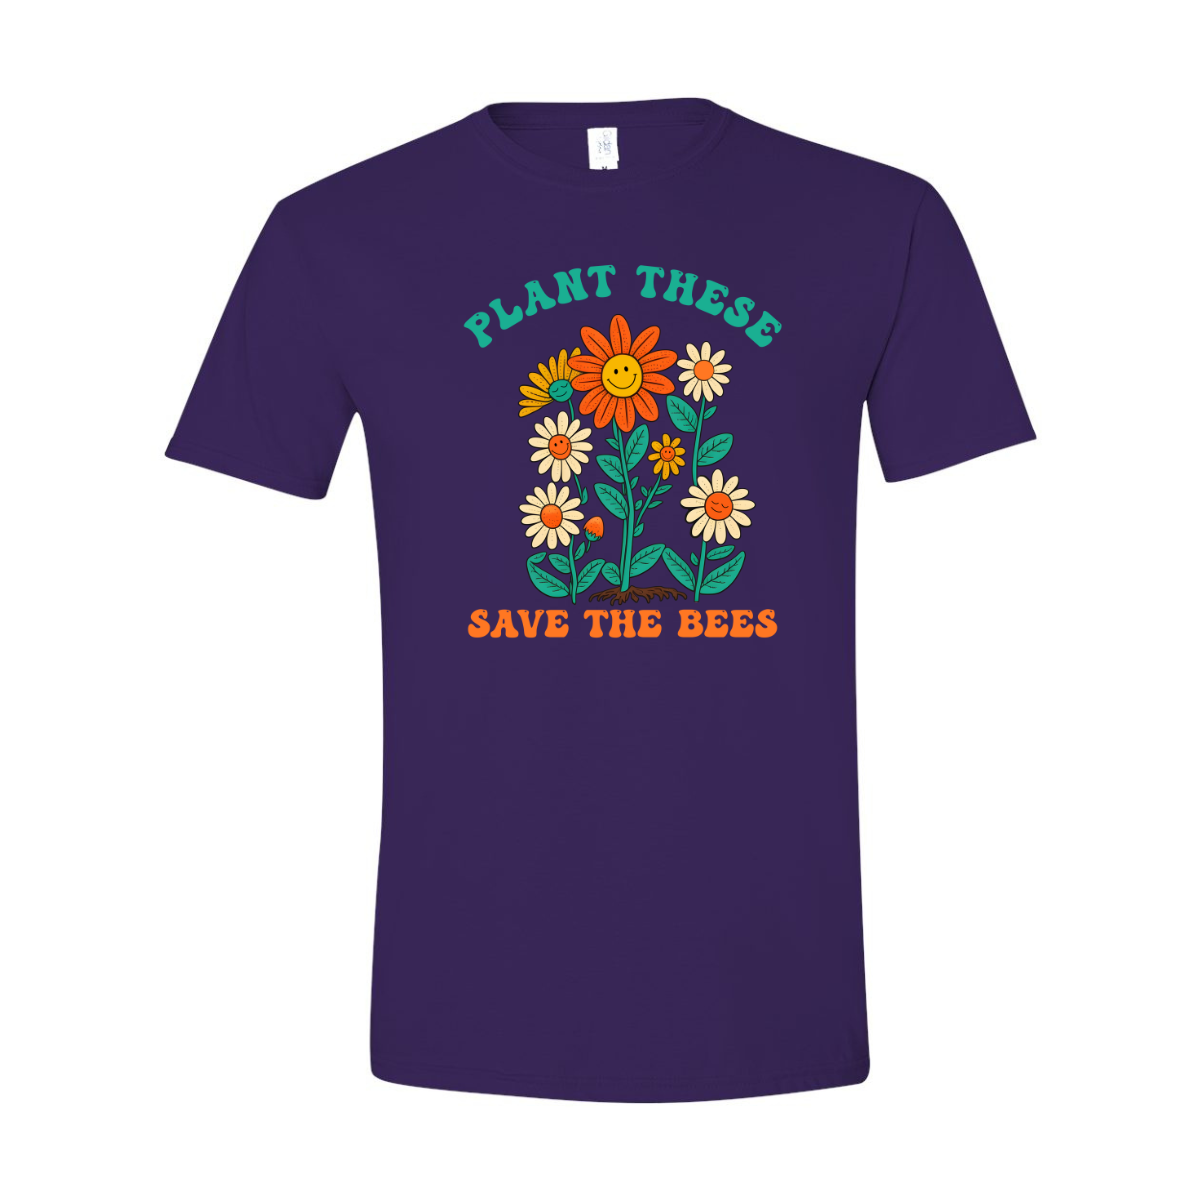 ADULT Unisex T-Shirt EDAA017 PLANT THESE SAVE THE BEES